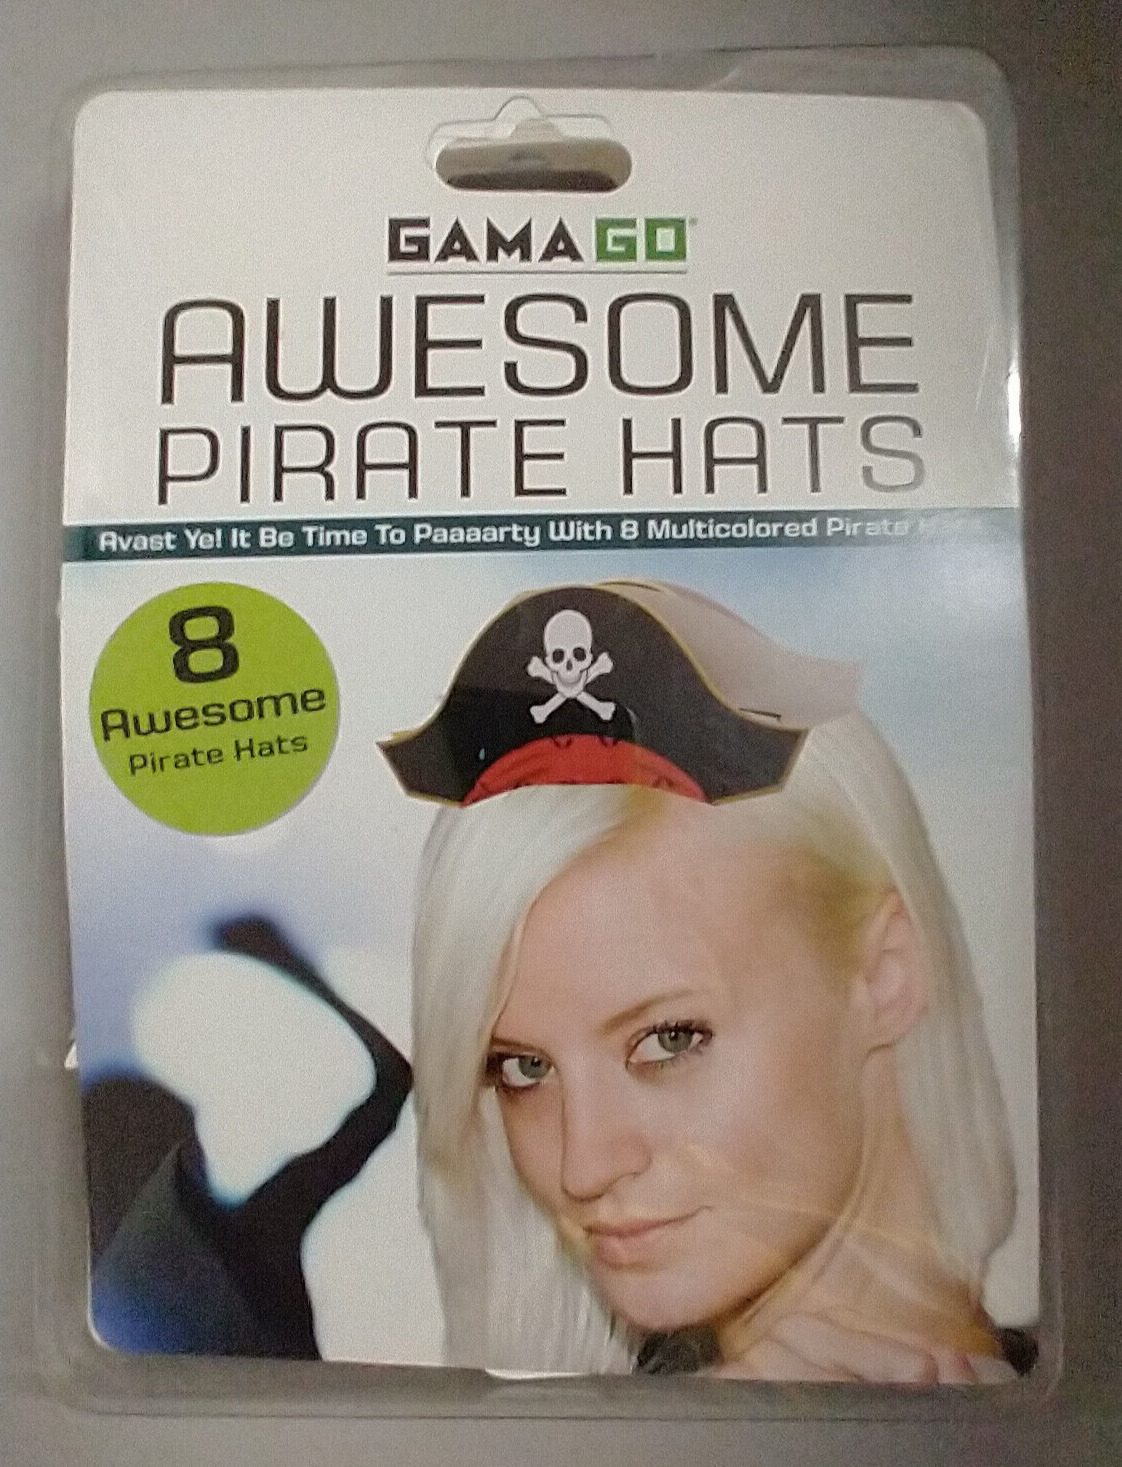 AWESOME PIRATE HATS by GamaGo - 8 Mini Pirate Hats - 2 each 4 Colors